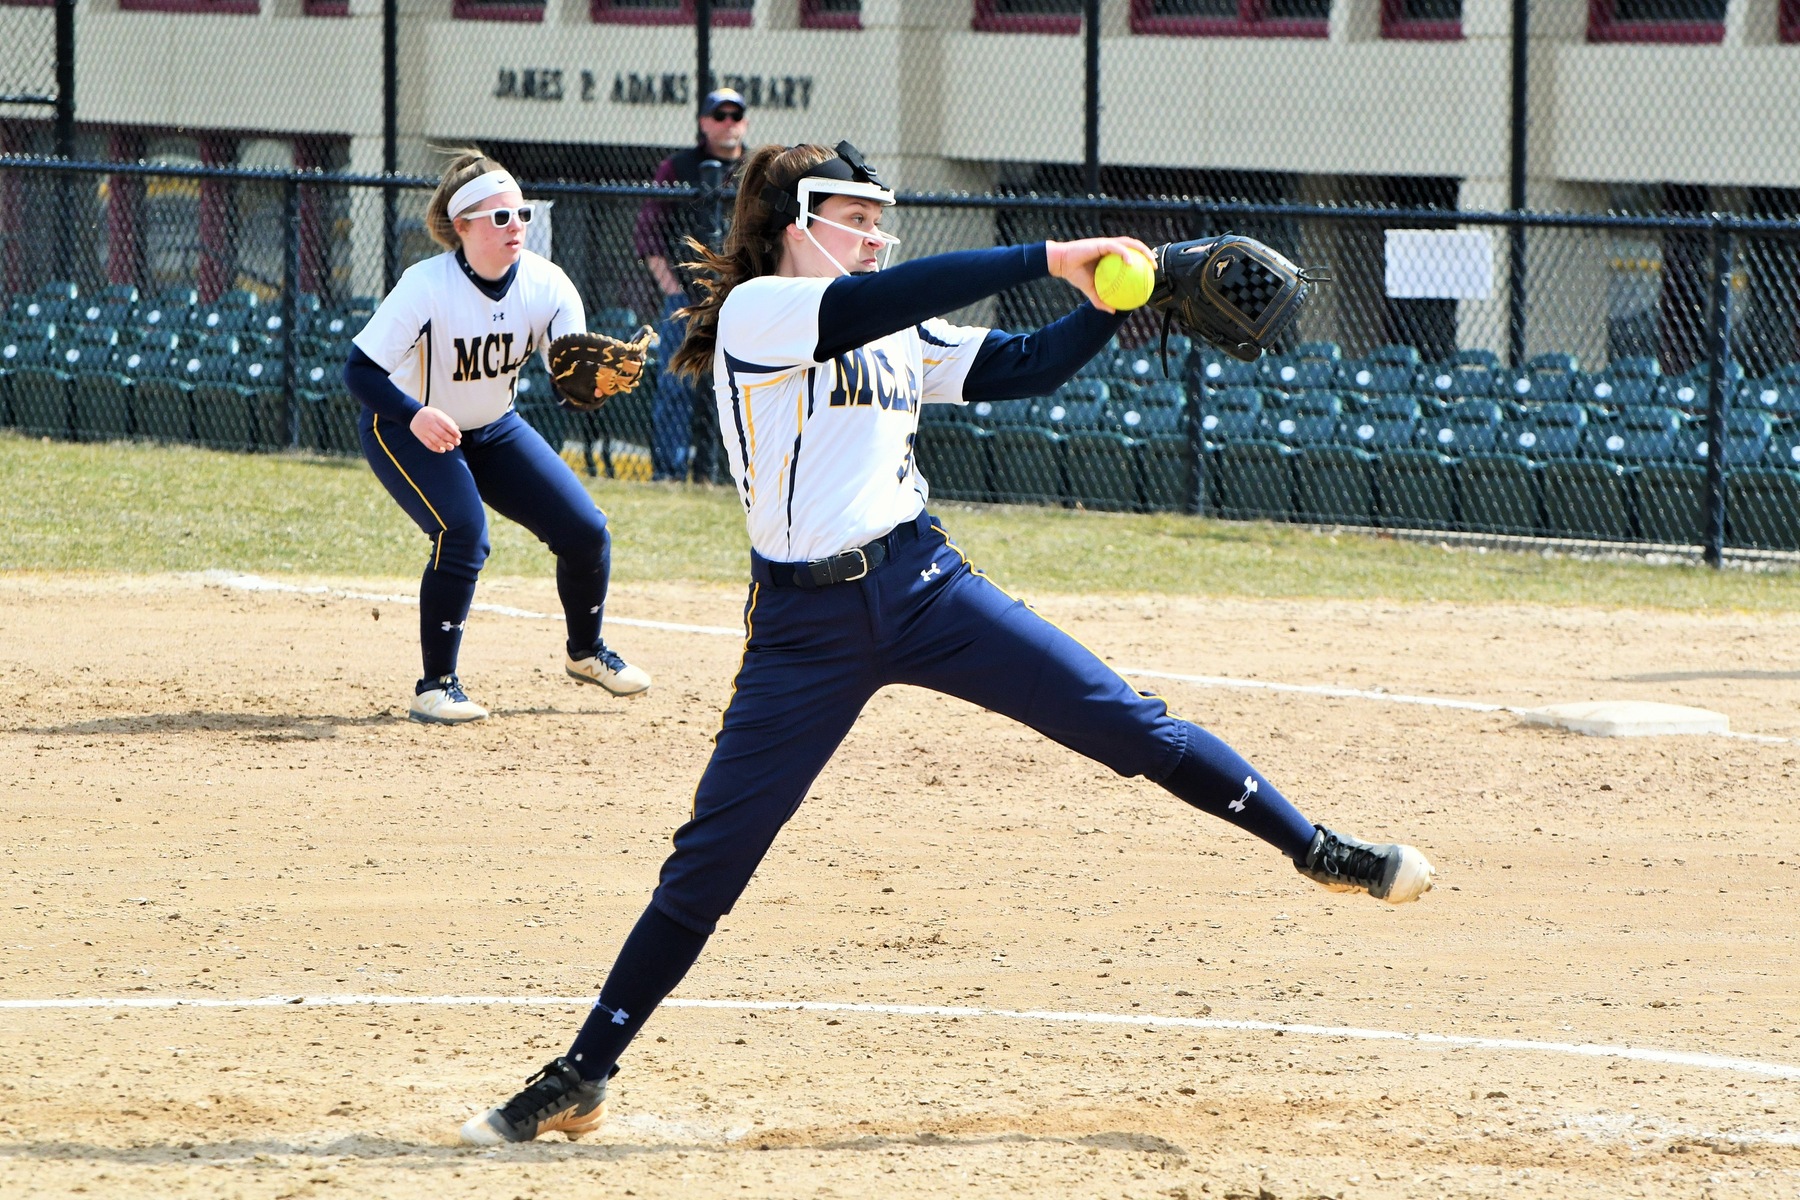 Softball's season comes to a close with 2-1 loss to Fitchburg in MASCAC opening round